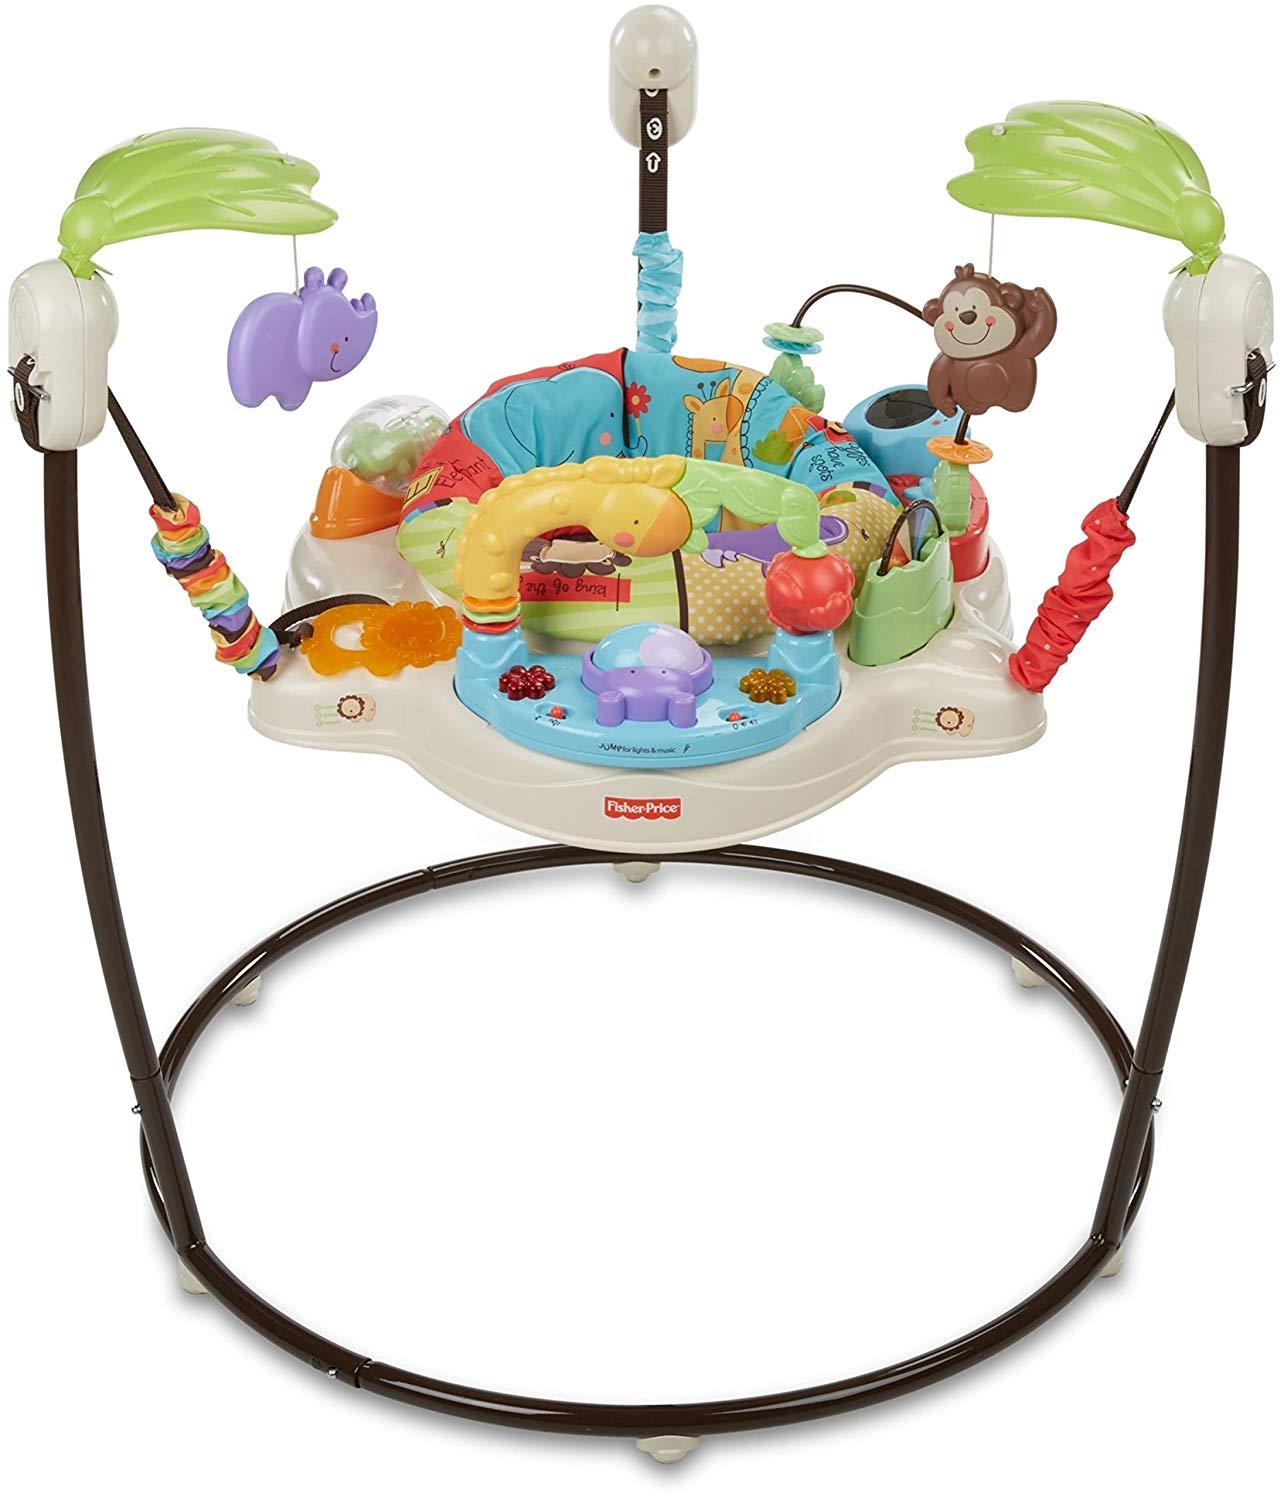 when can you use a jumperoo with baby